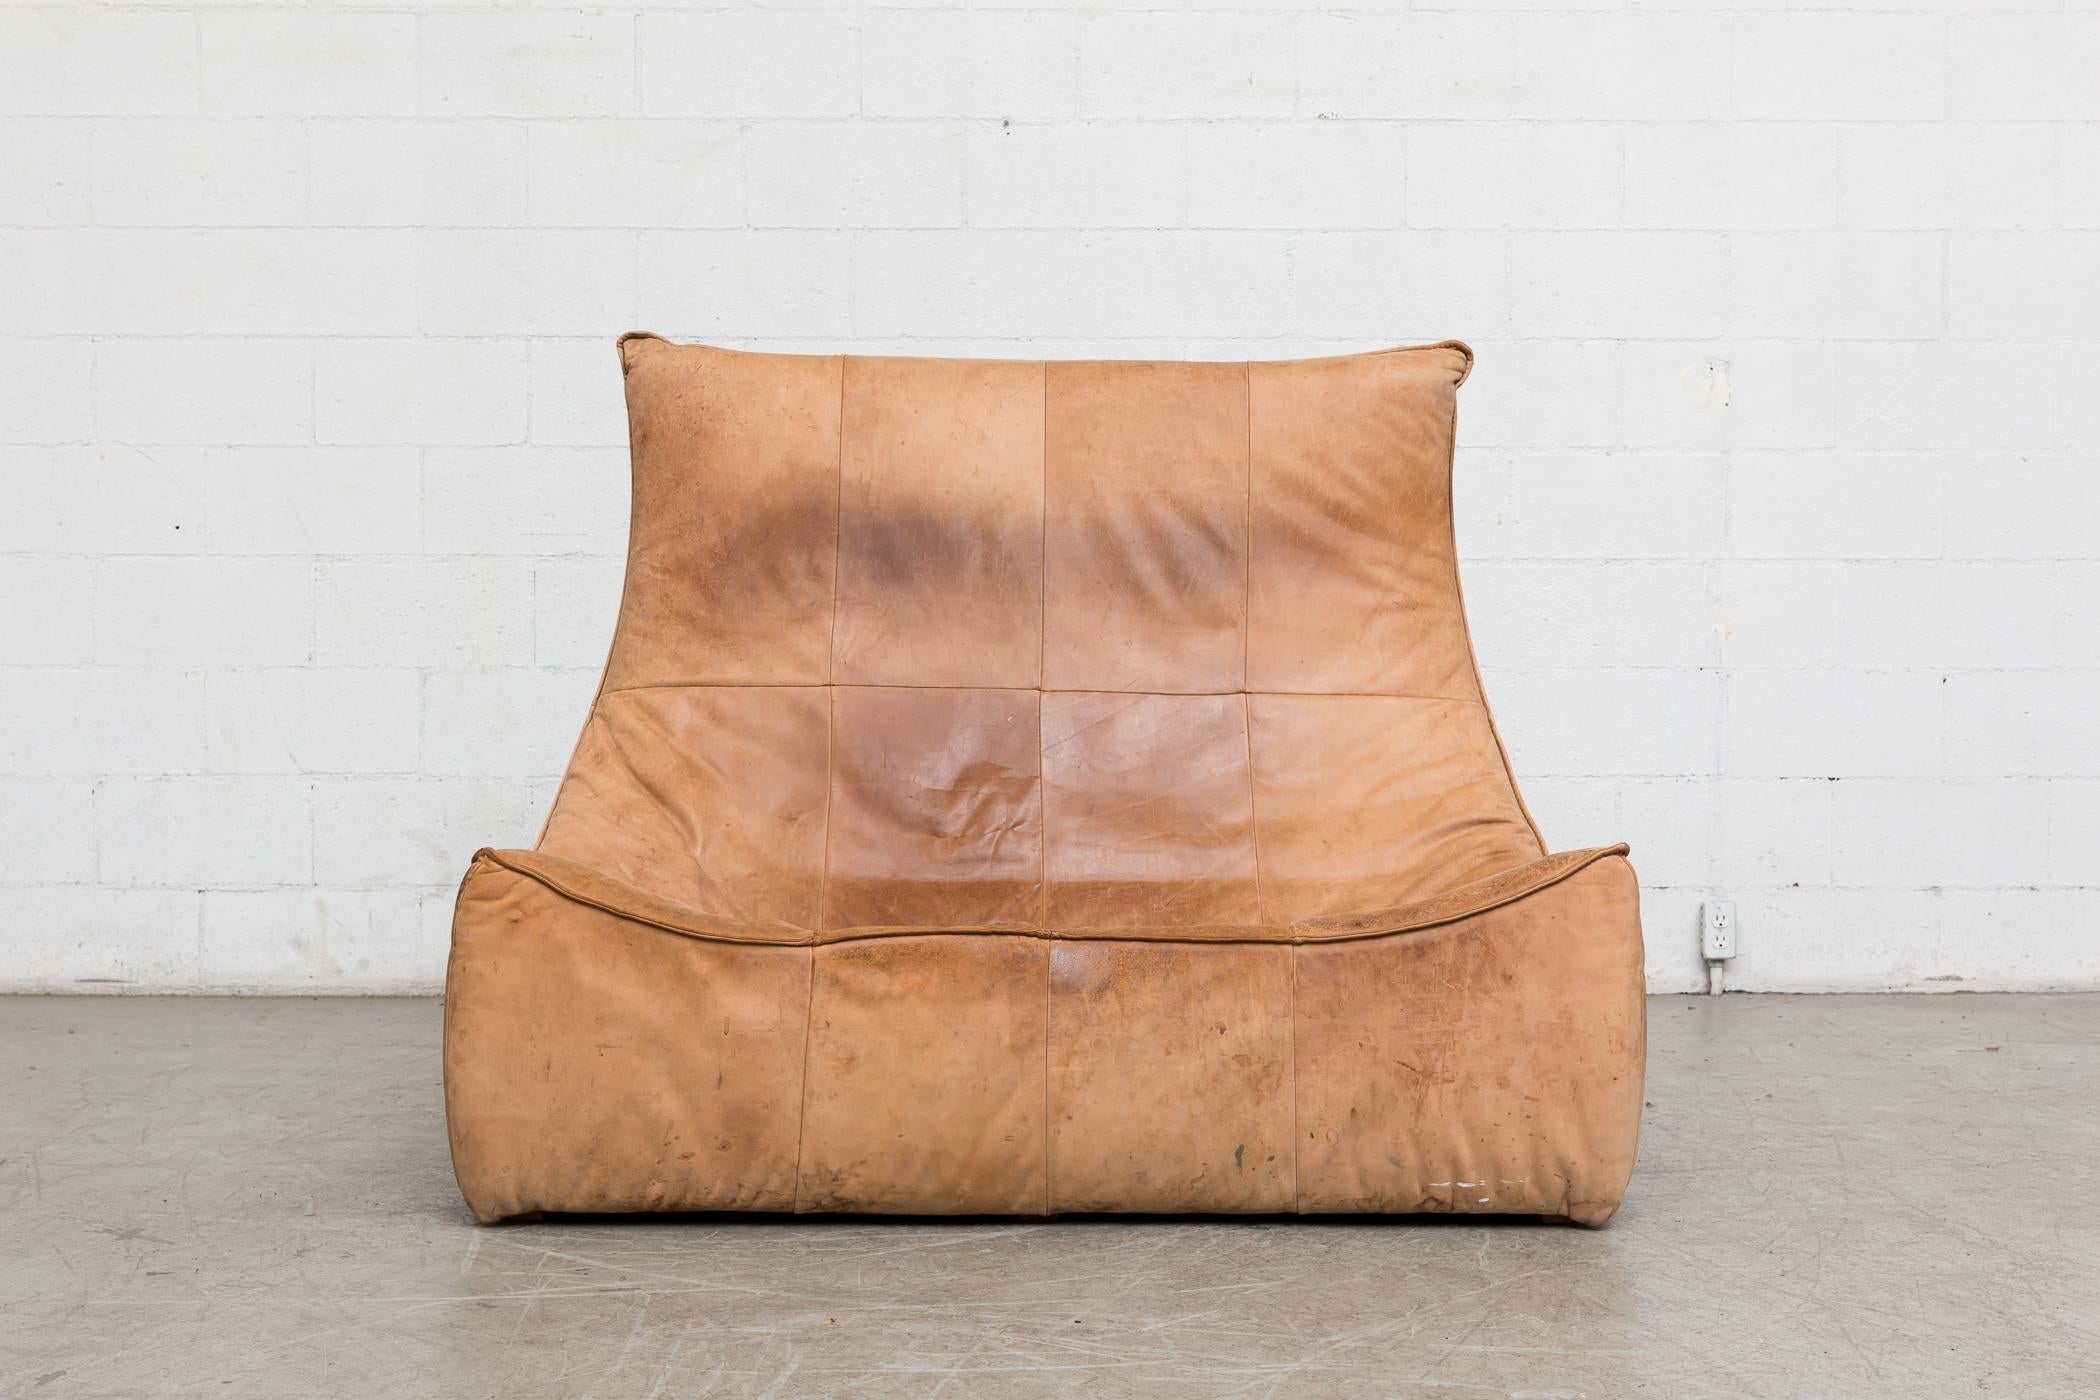 Two-seat natural leather sofa designed by Gerard van den Berg for Montis, 1970. Amazing piece of furniture design! In original condition, great patina, visible wear to leather, some staining, seat seam unravelling and evidence of cat claws to seat